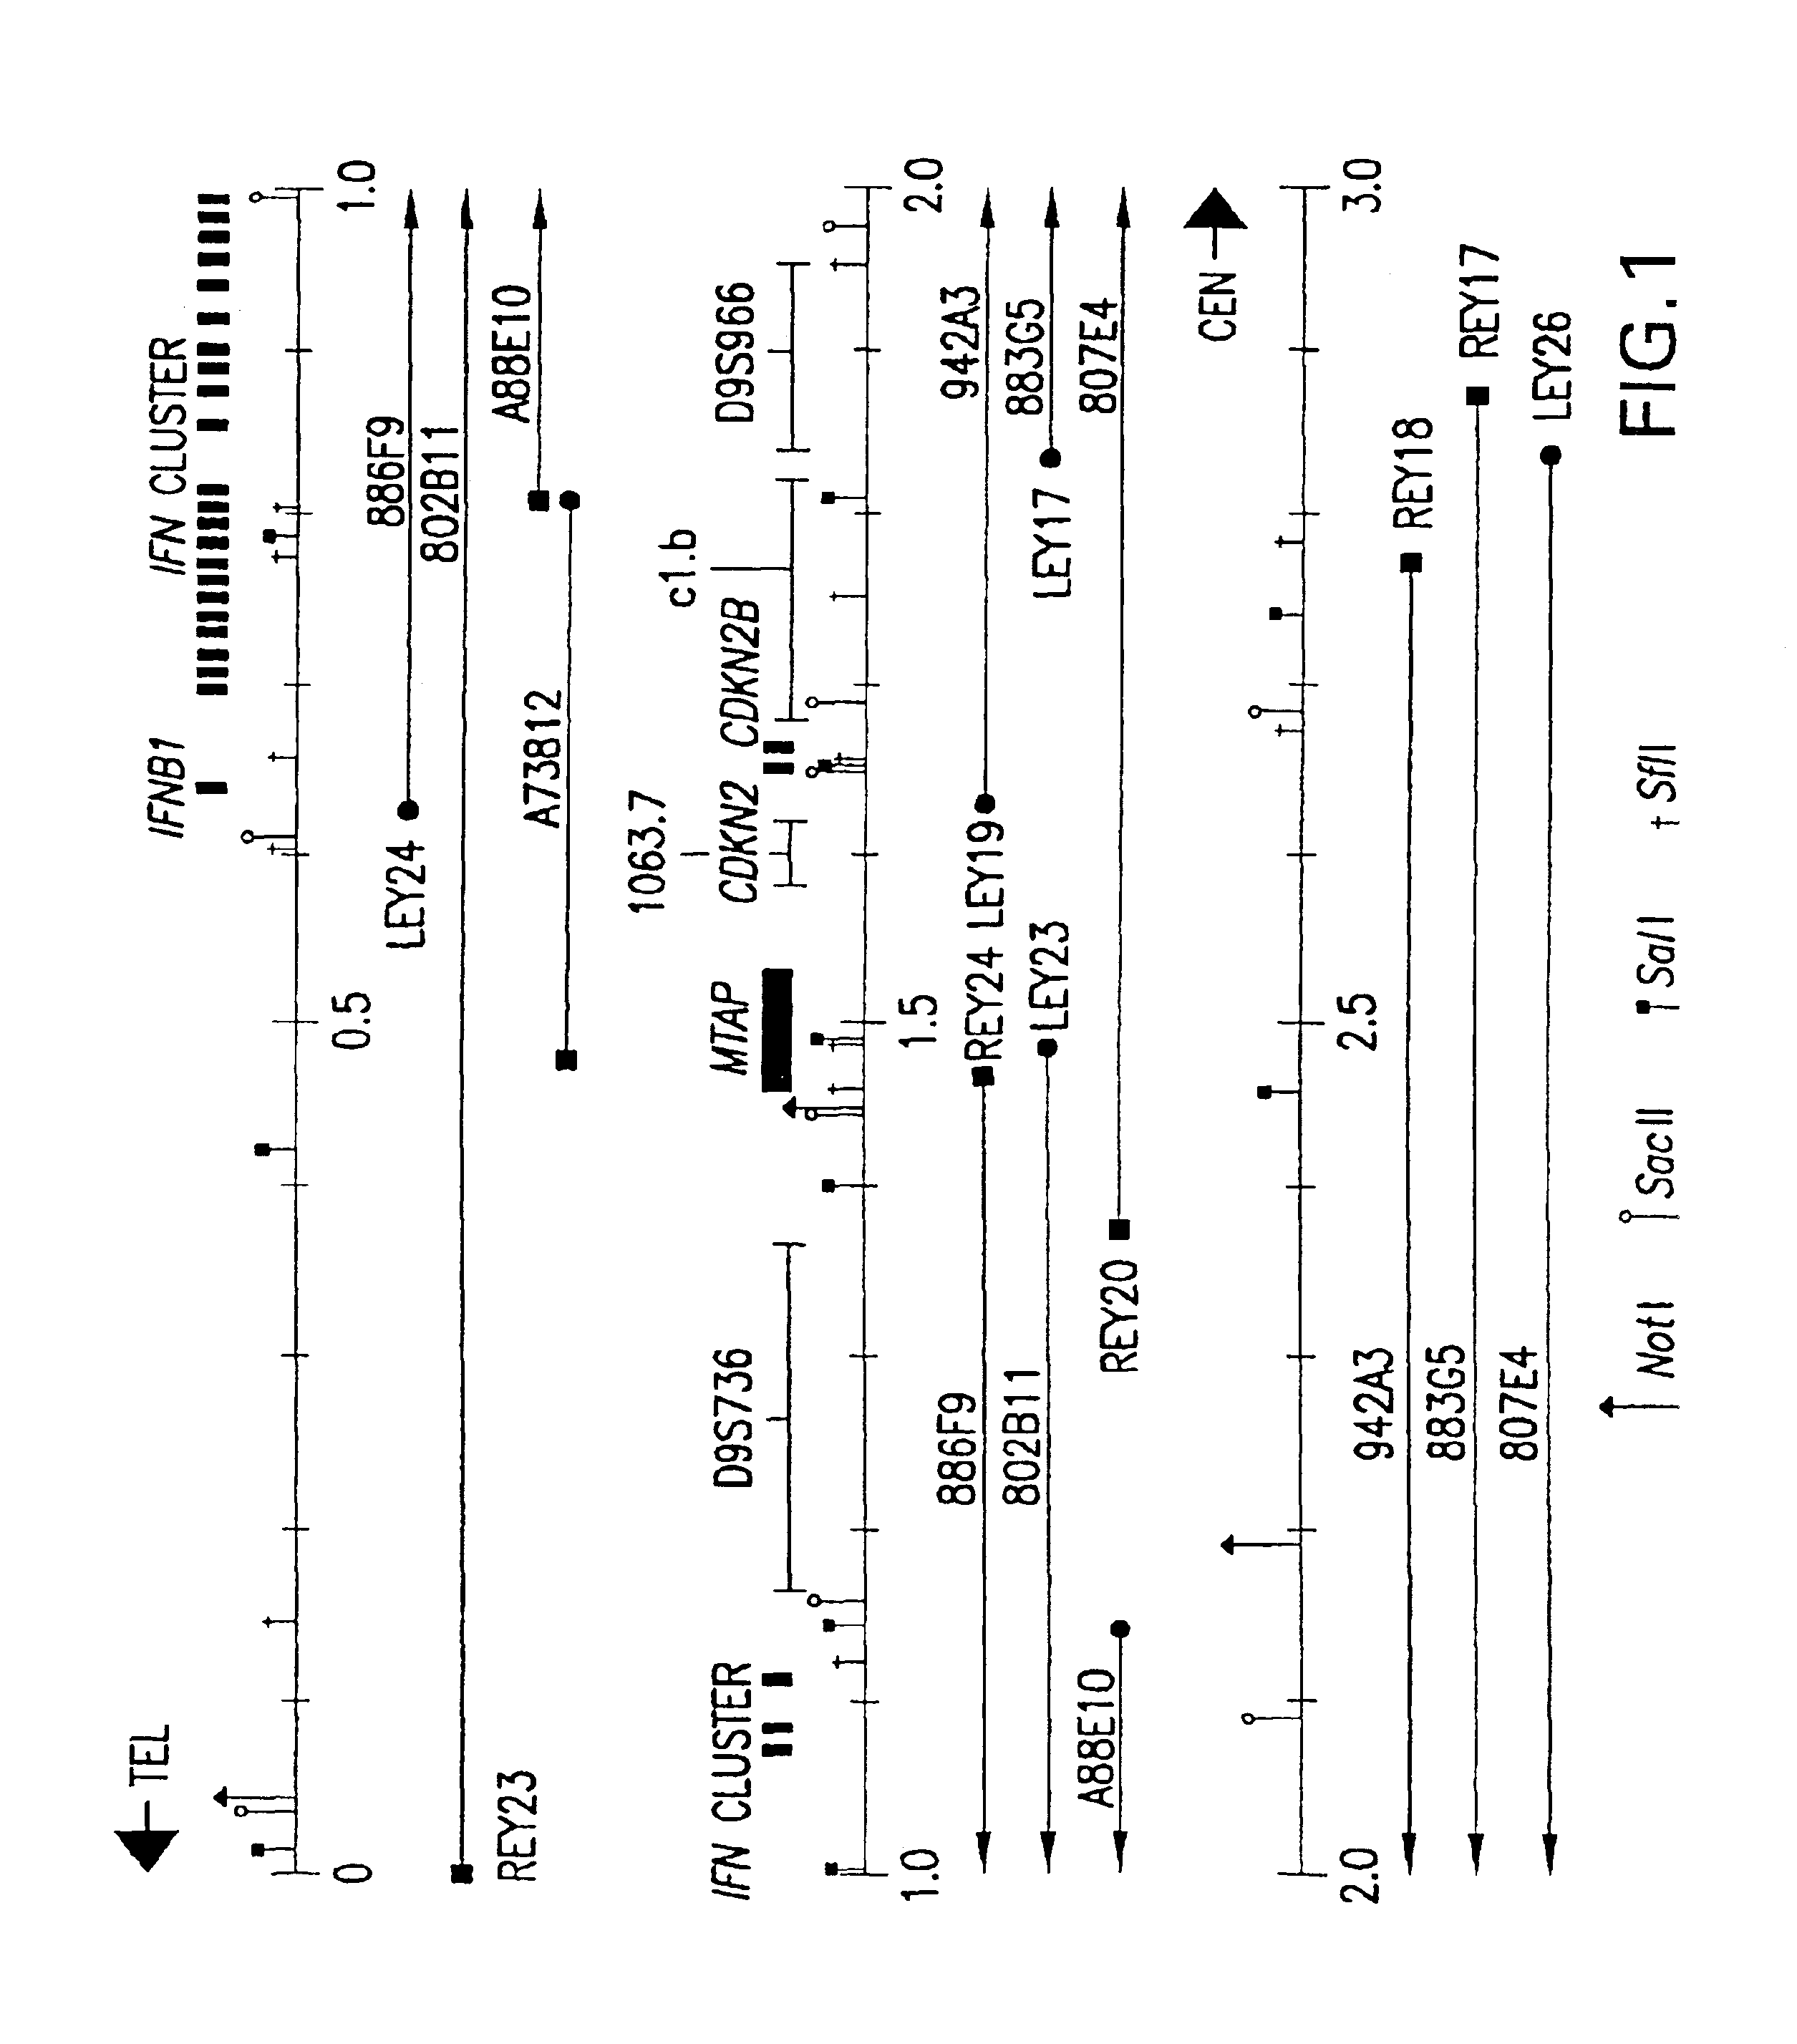 Methylthioadenosine phosphorylase compositions and methods of use in the diagnosis and treatment of proliferative disorders